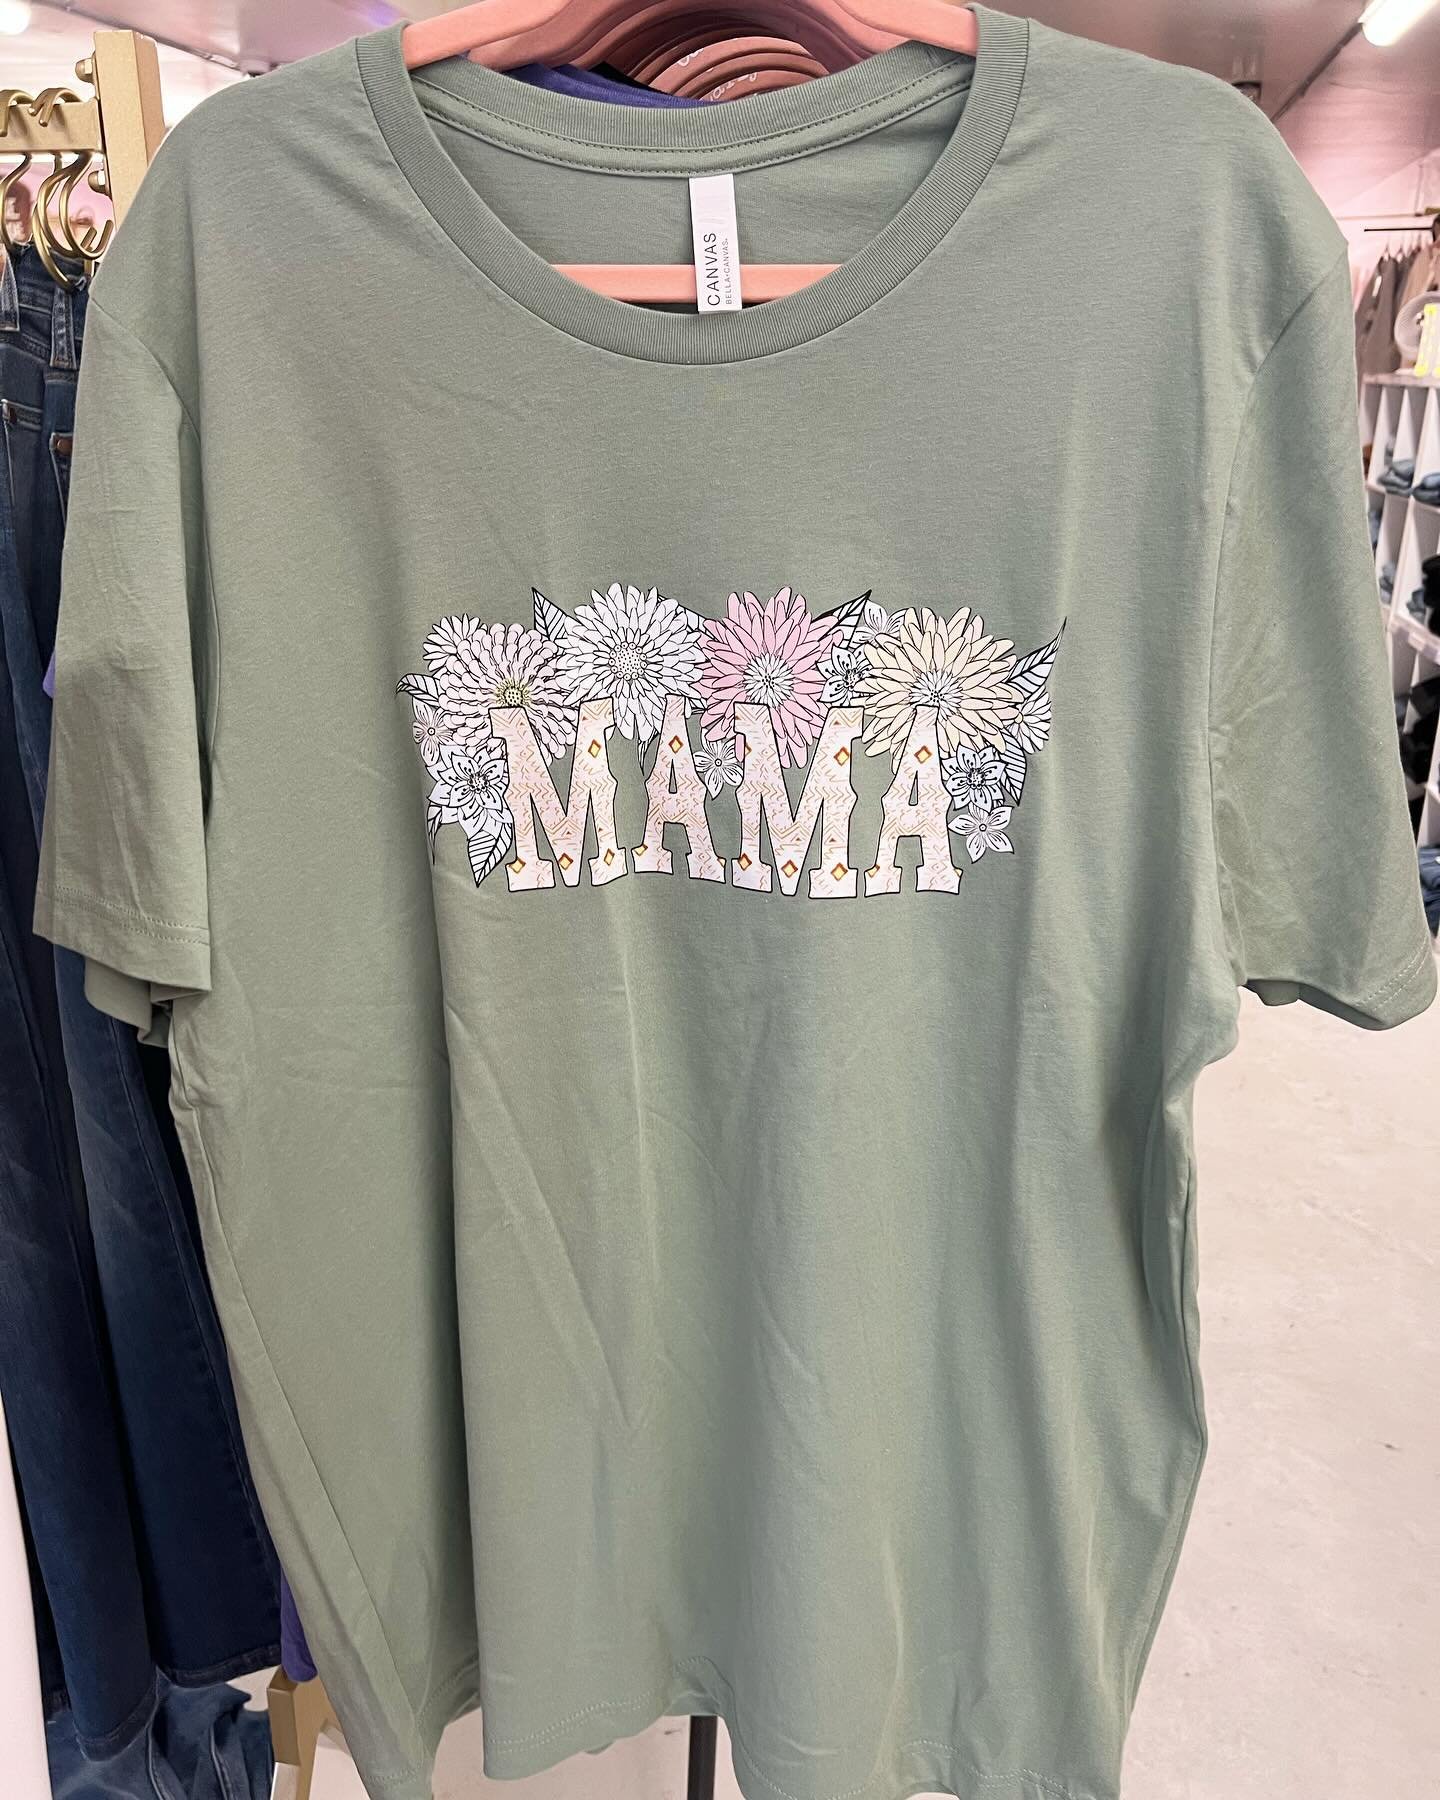 We still have some cute Mama tees available in our Sylva store! Lots of other great gifts to shop for Mother&rsquo;s Day too! 💐

🛍️ 561 Mill Street, downtown Sylva 
💕 Look for the pink store! 
🕐 Open Fri &amp; Sat 10-7, Sunday 12-5 (we will be cl